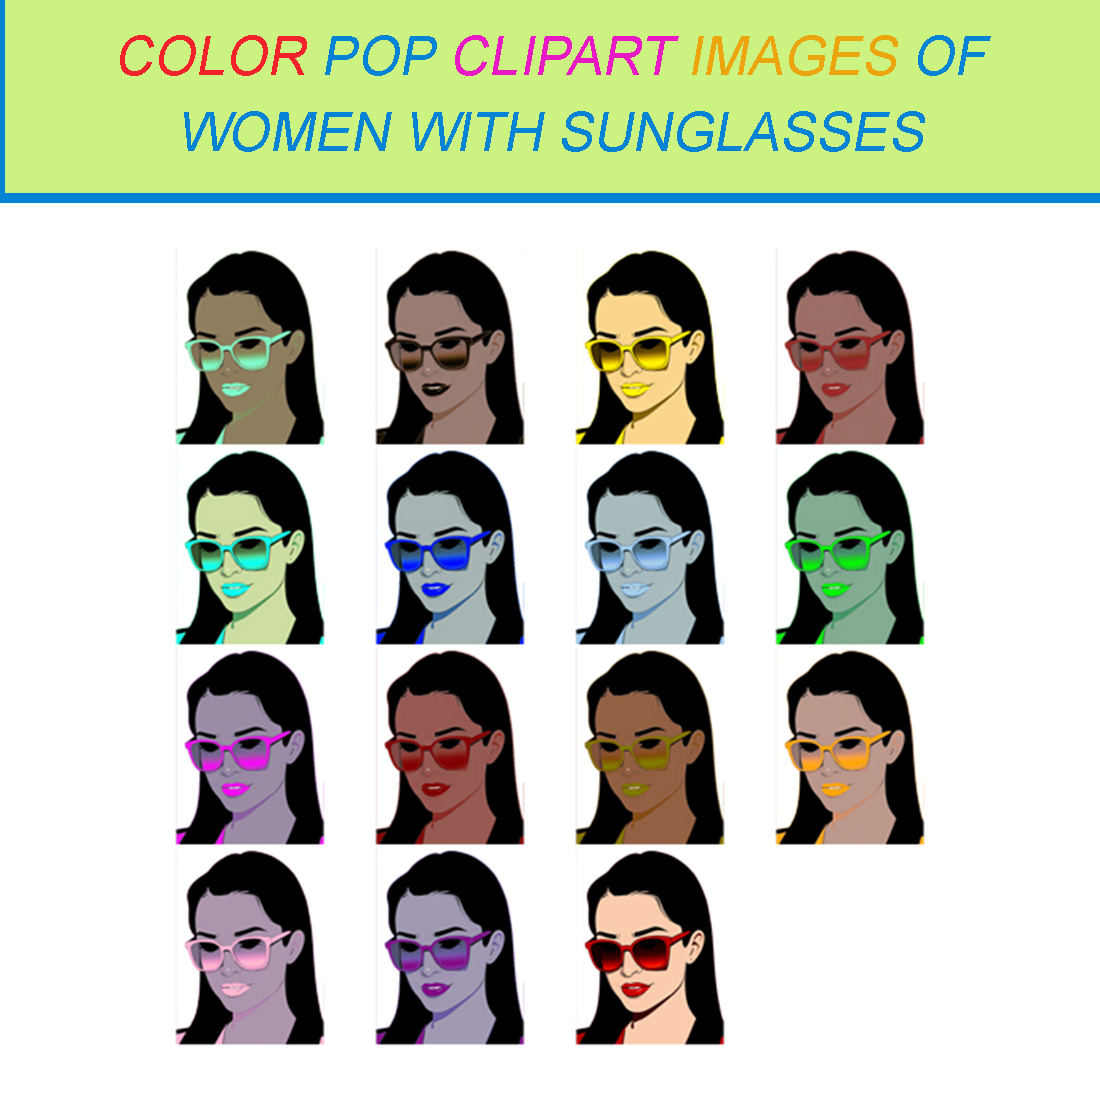 15 COLOR POP CLIPART IMAGES OF WOMEN WITH SUNGLASSES cover image.